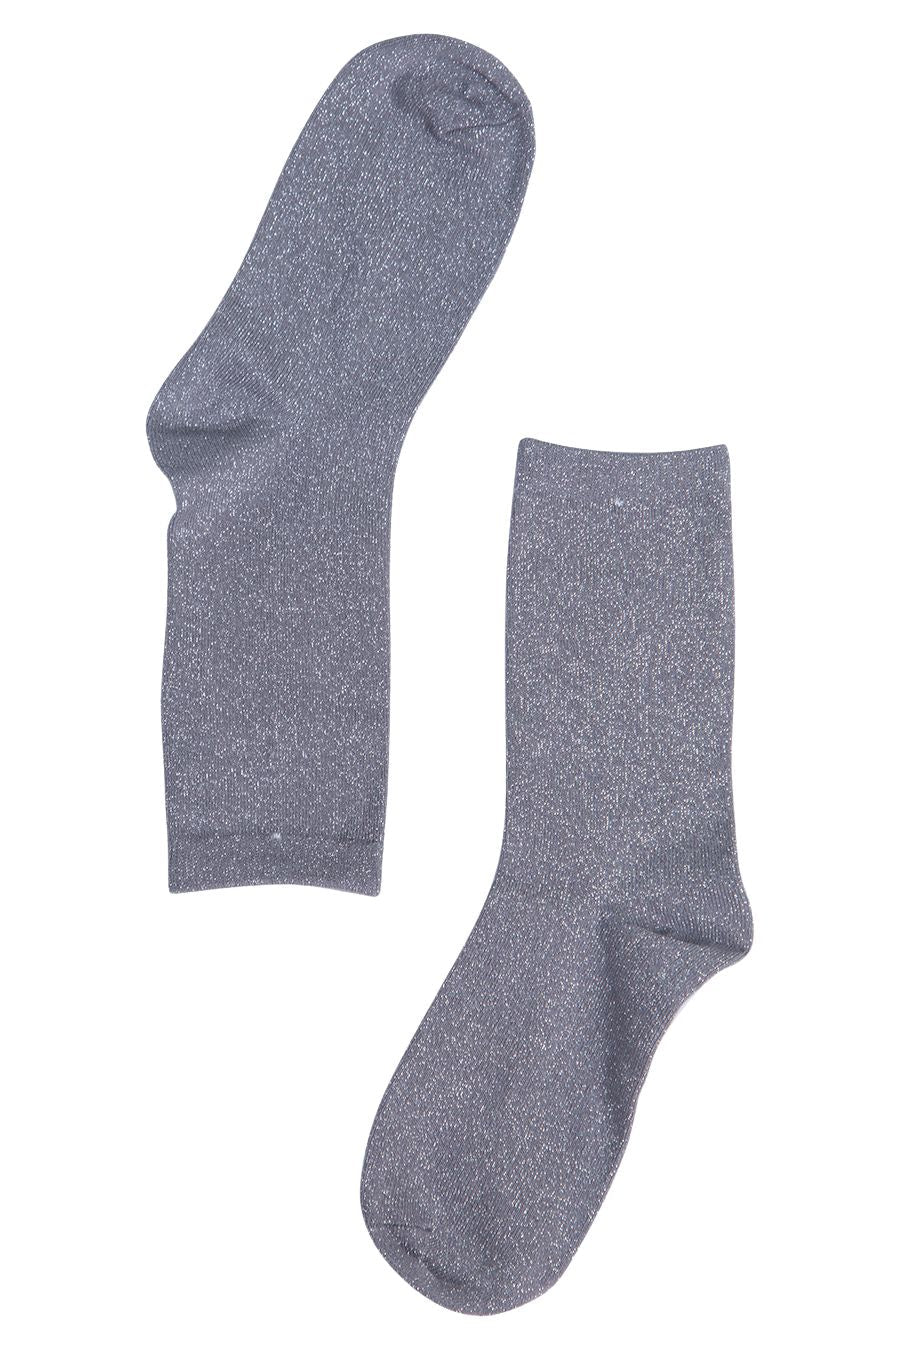 grey and silver glitter ankle socks